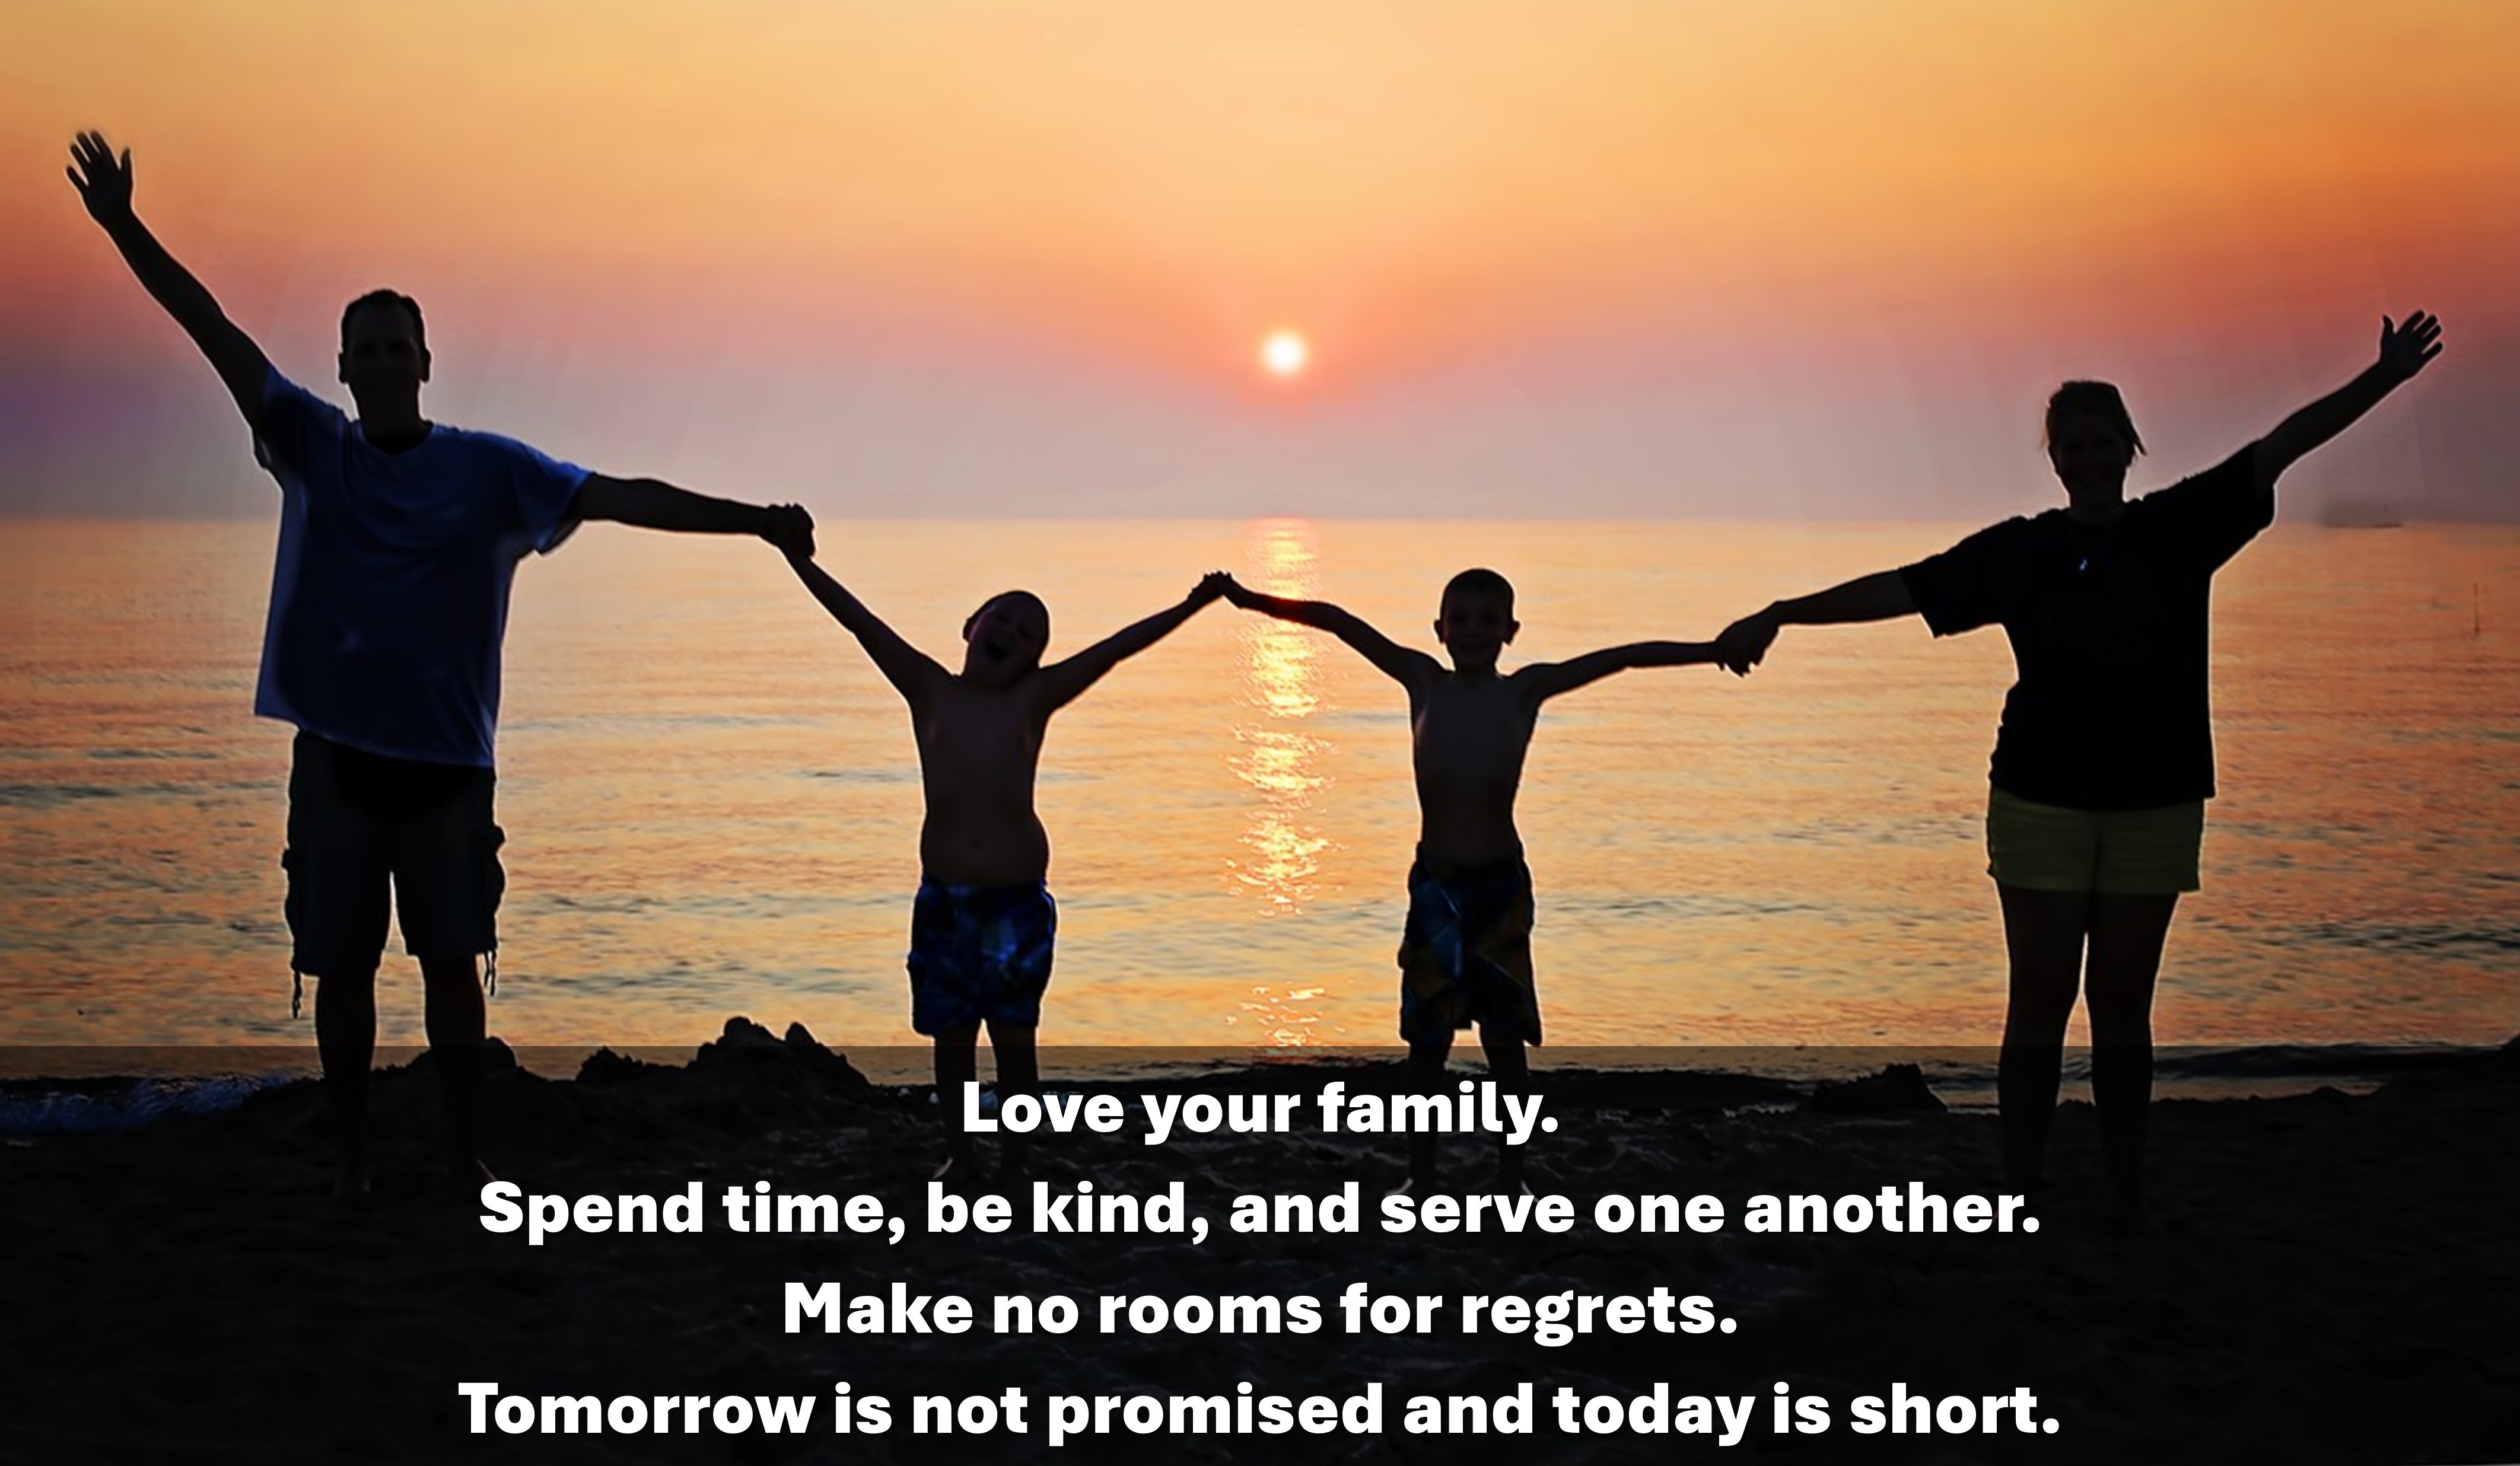 Love your family.
Spend time&#44; be kind&#44; and serve one another.
Make no rooms for regrets.
Tomorrow is not promised and today is short. 
가족&#44; 소중한&#44; 사랑